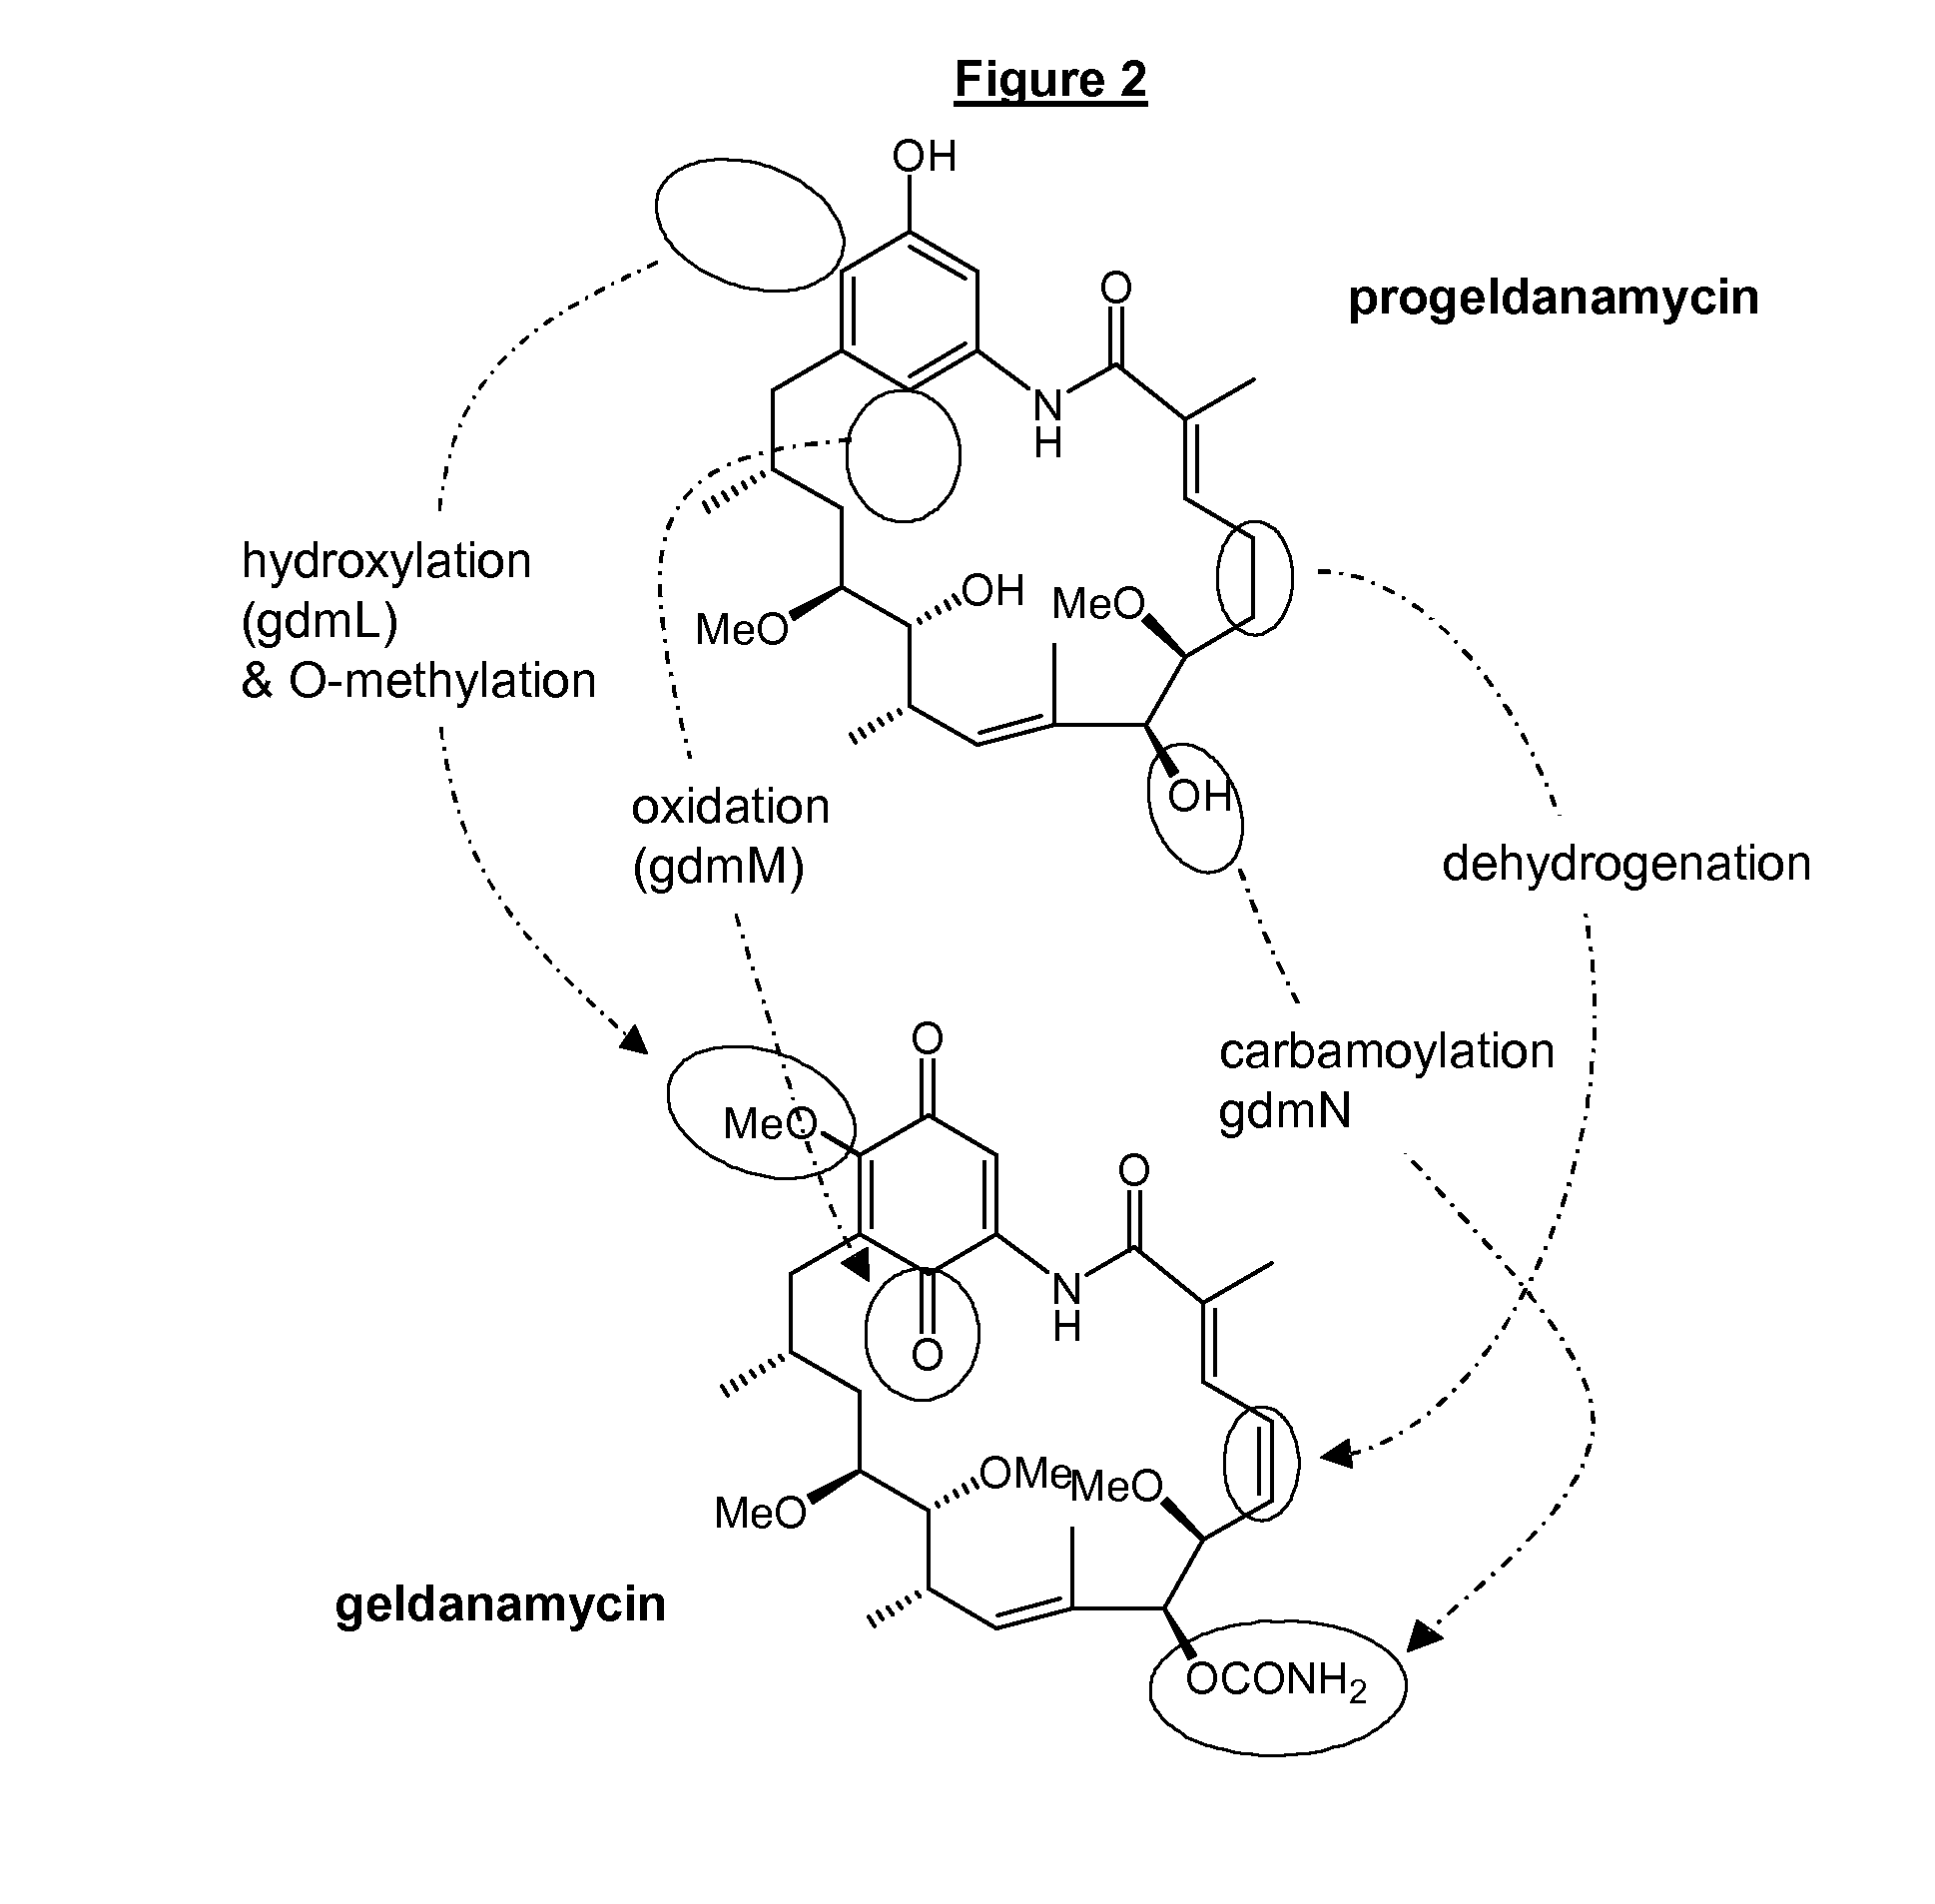 Compounds and methods for their production